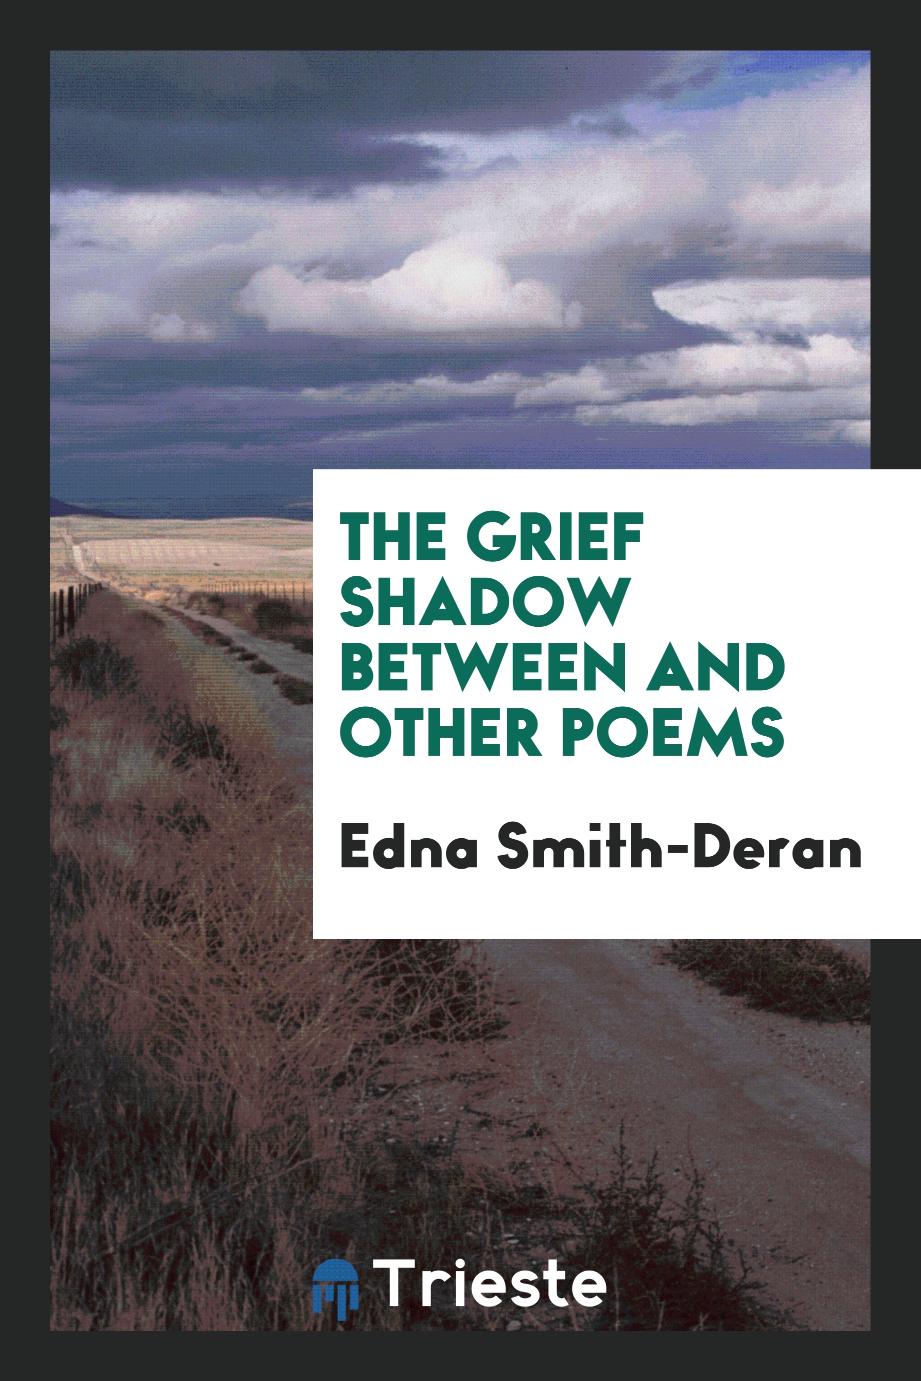 The grief shadow between and other poems